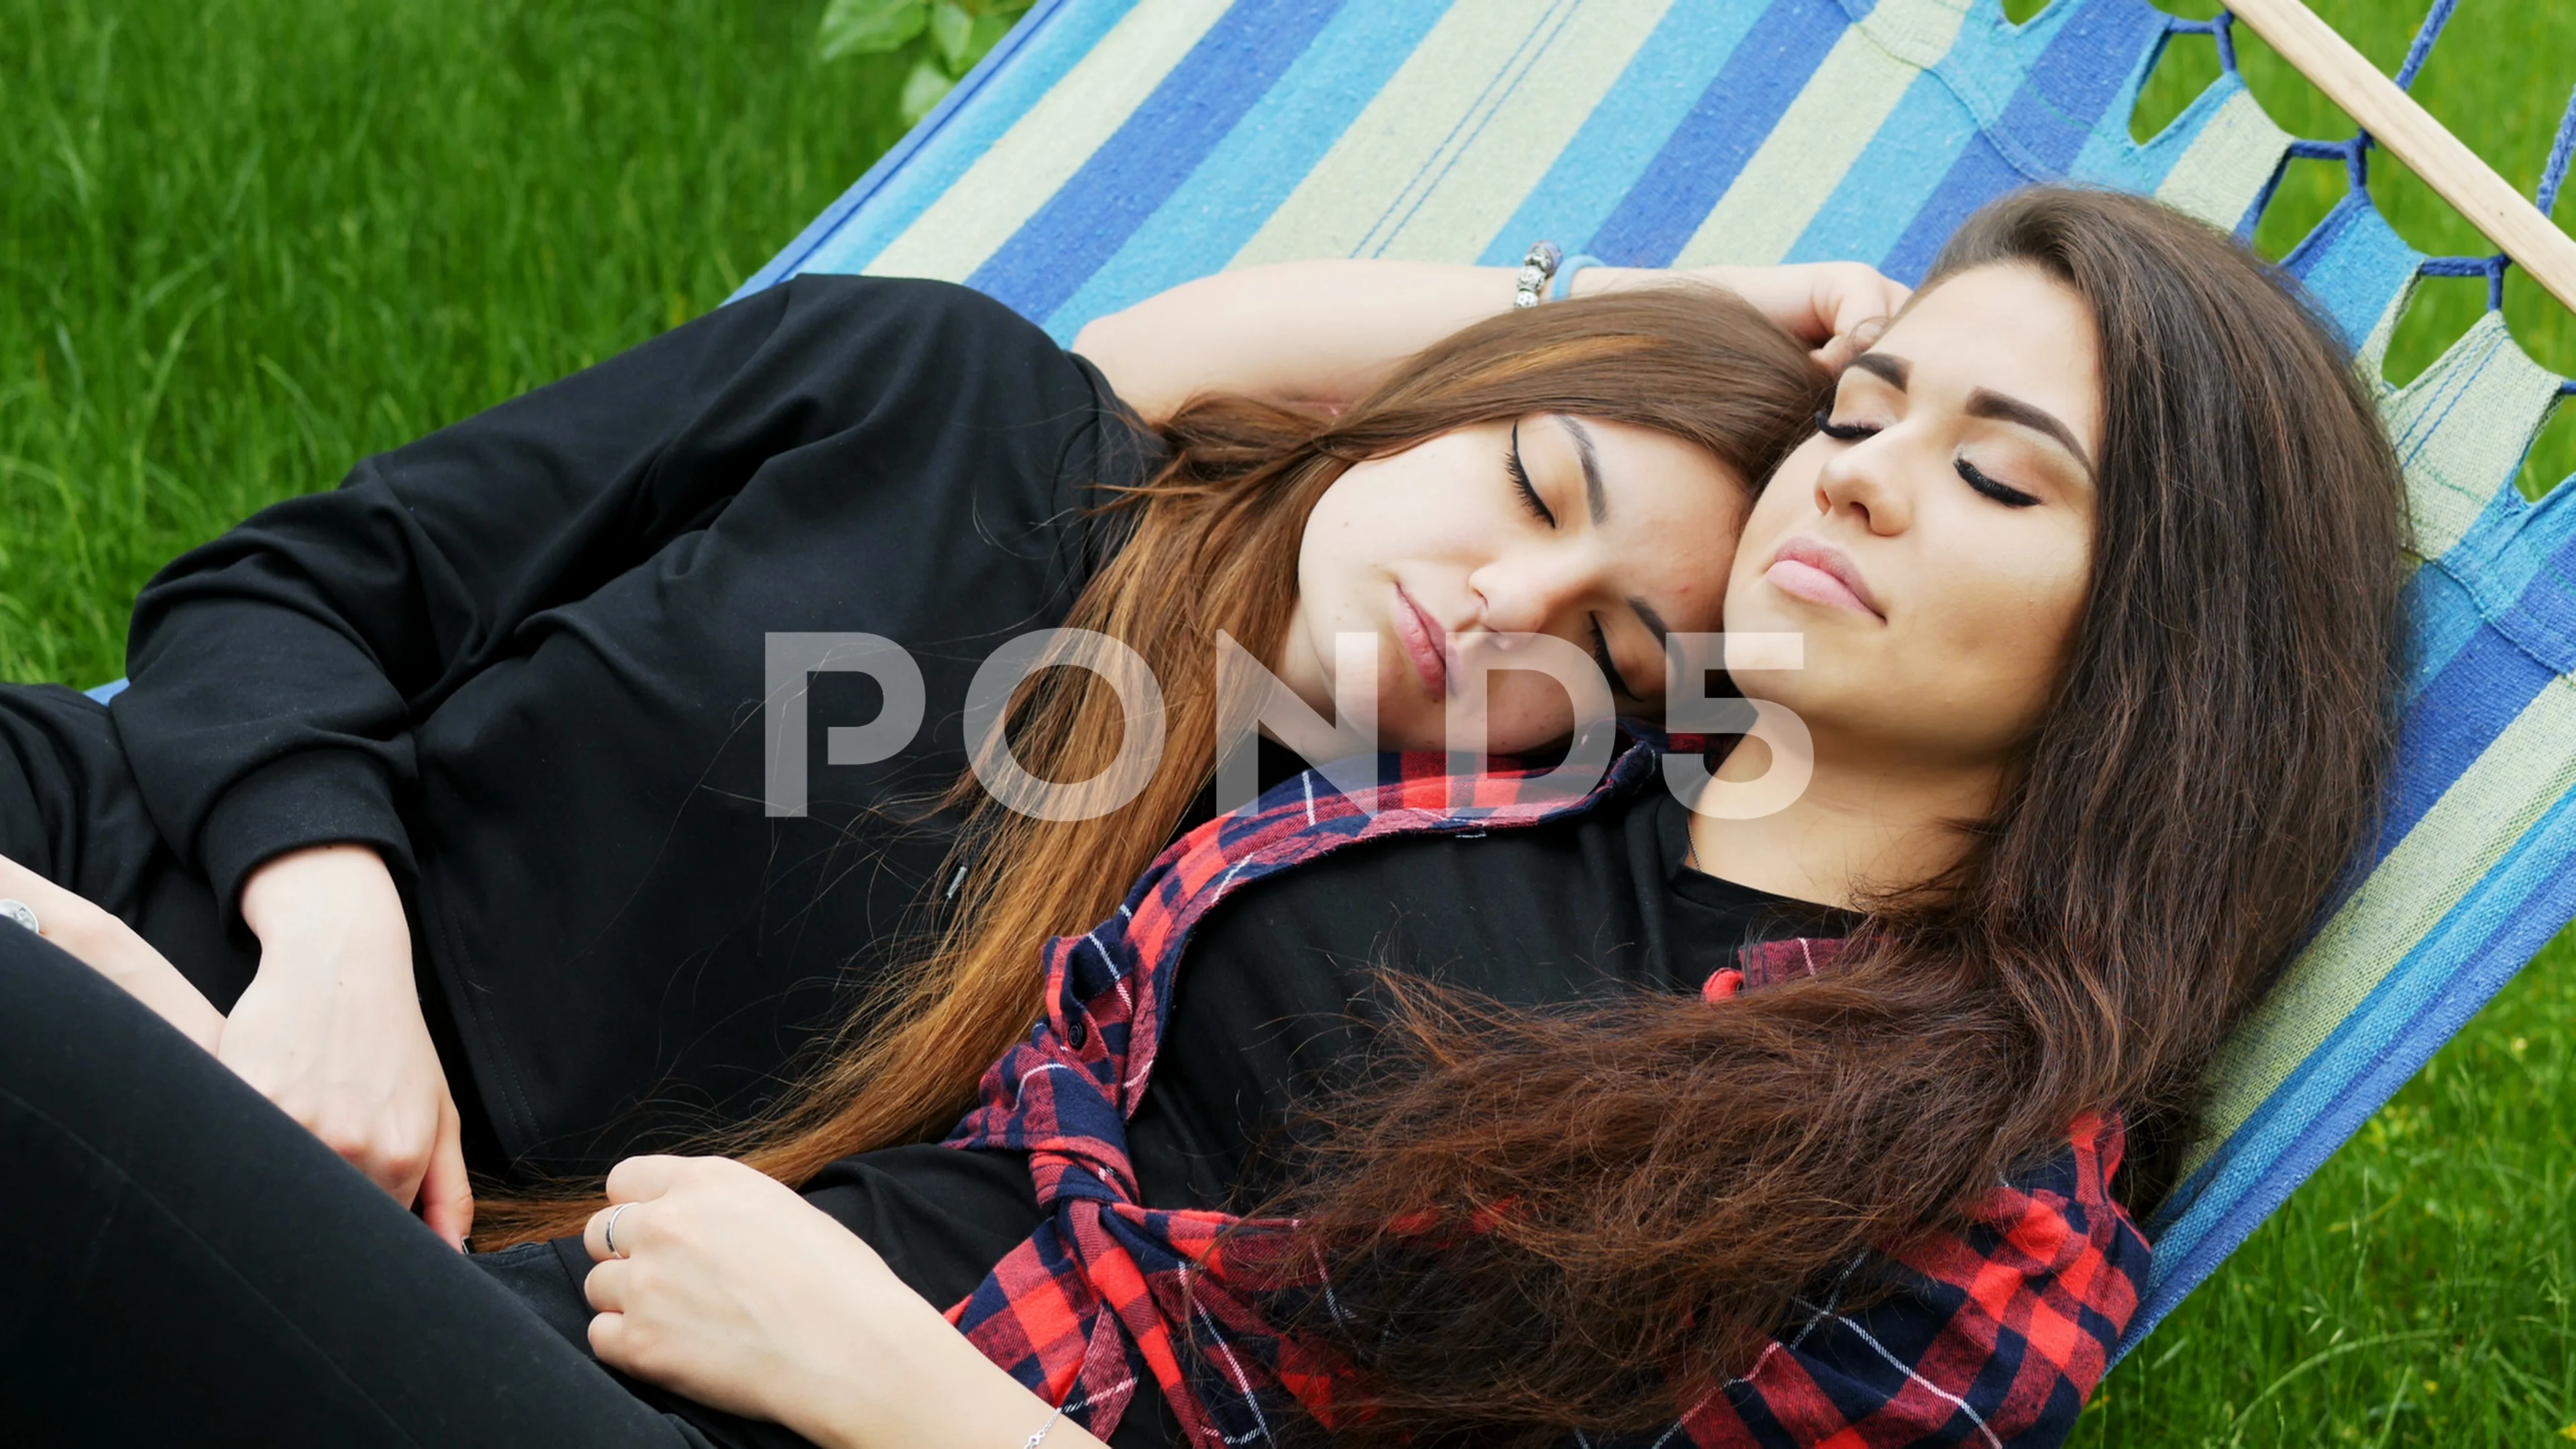 anita bunch recommends two girls sleeping together pic